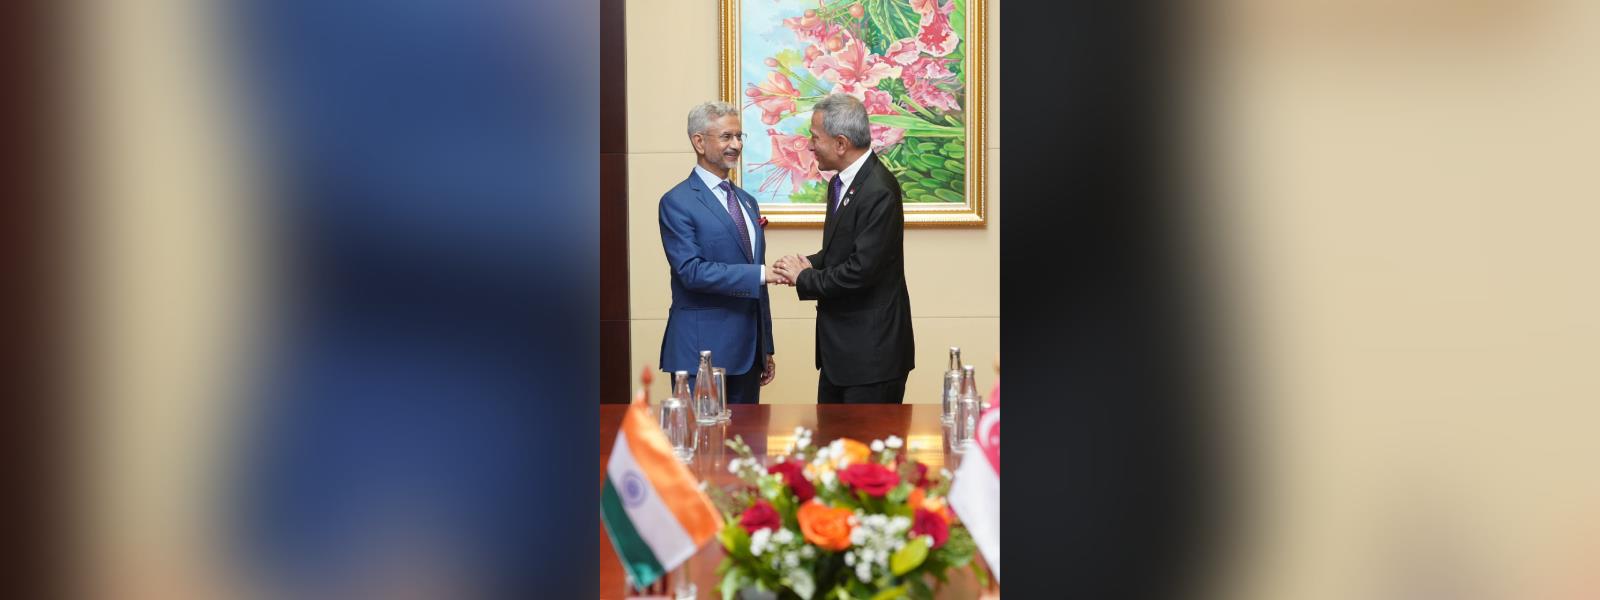 External Affairs Minister Dr. S. Jaishankar met H.E. Dr. Vivian Balakrishnan, Minister for Foreign Affairs of Singapore on the sidelines of ASEAN meetings in Vientiane